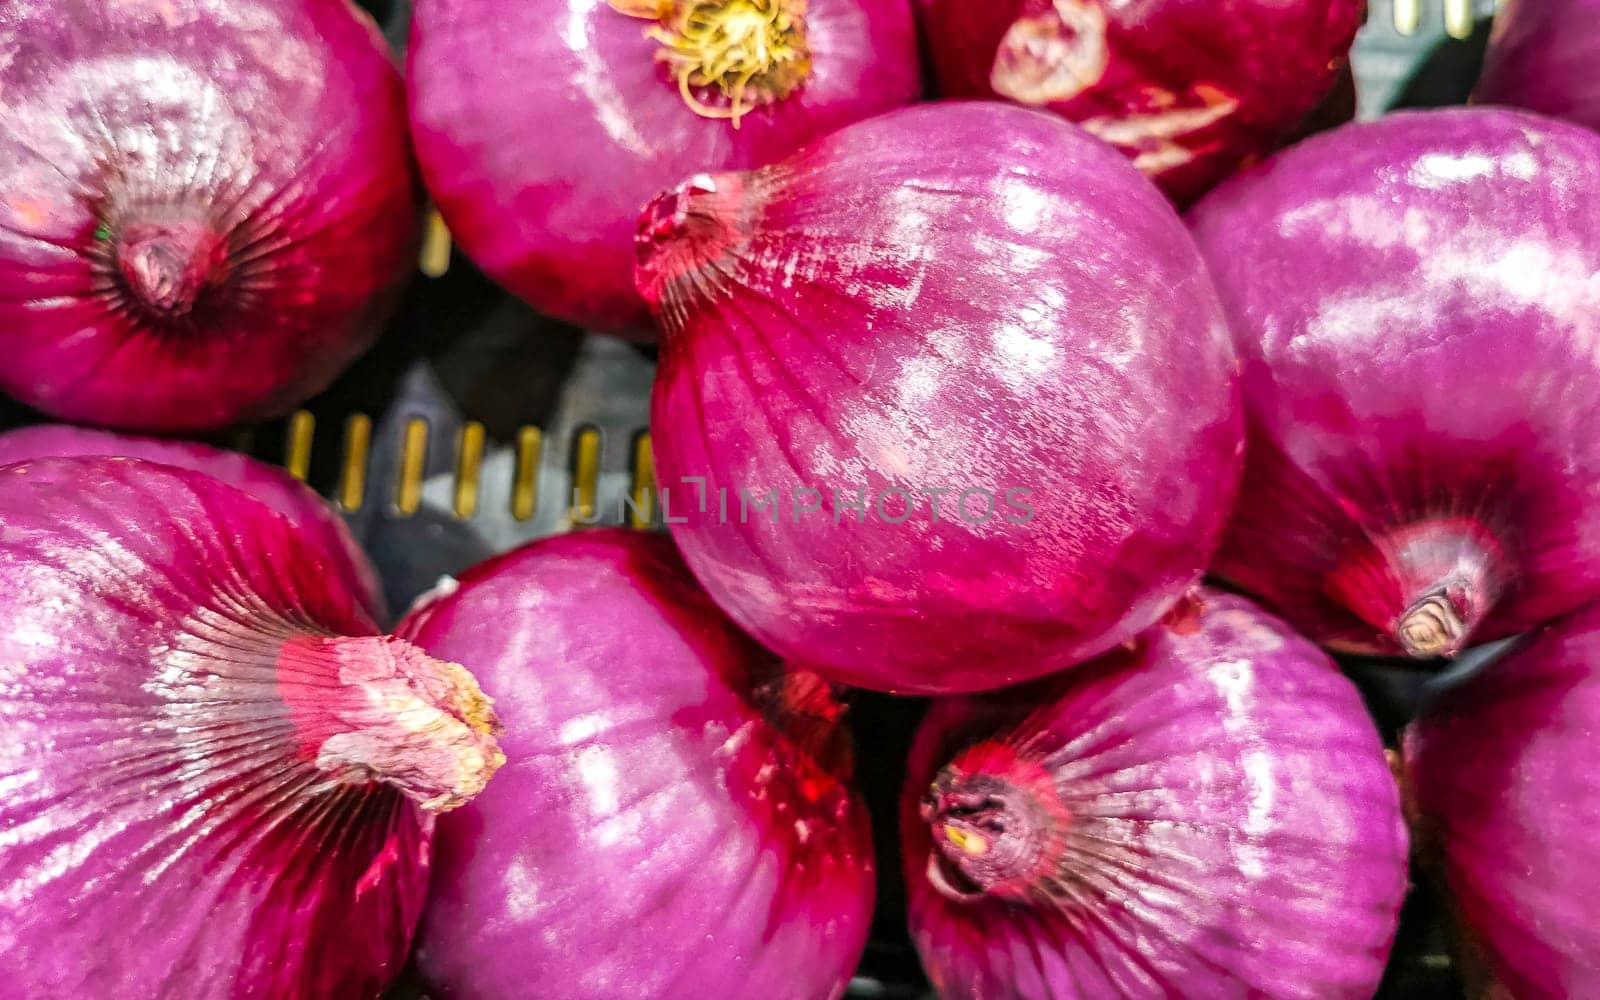 Onions onion red purple and white vegetables on the market in Zicatela Puerto Escondido Oaxaca Mexico.